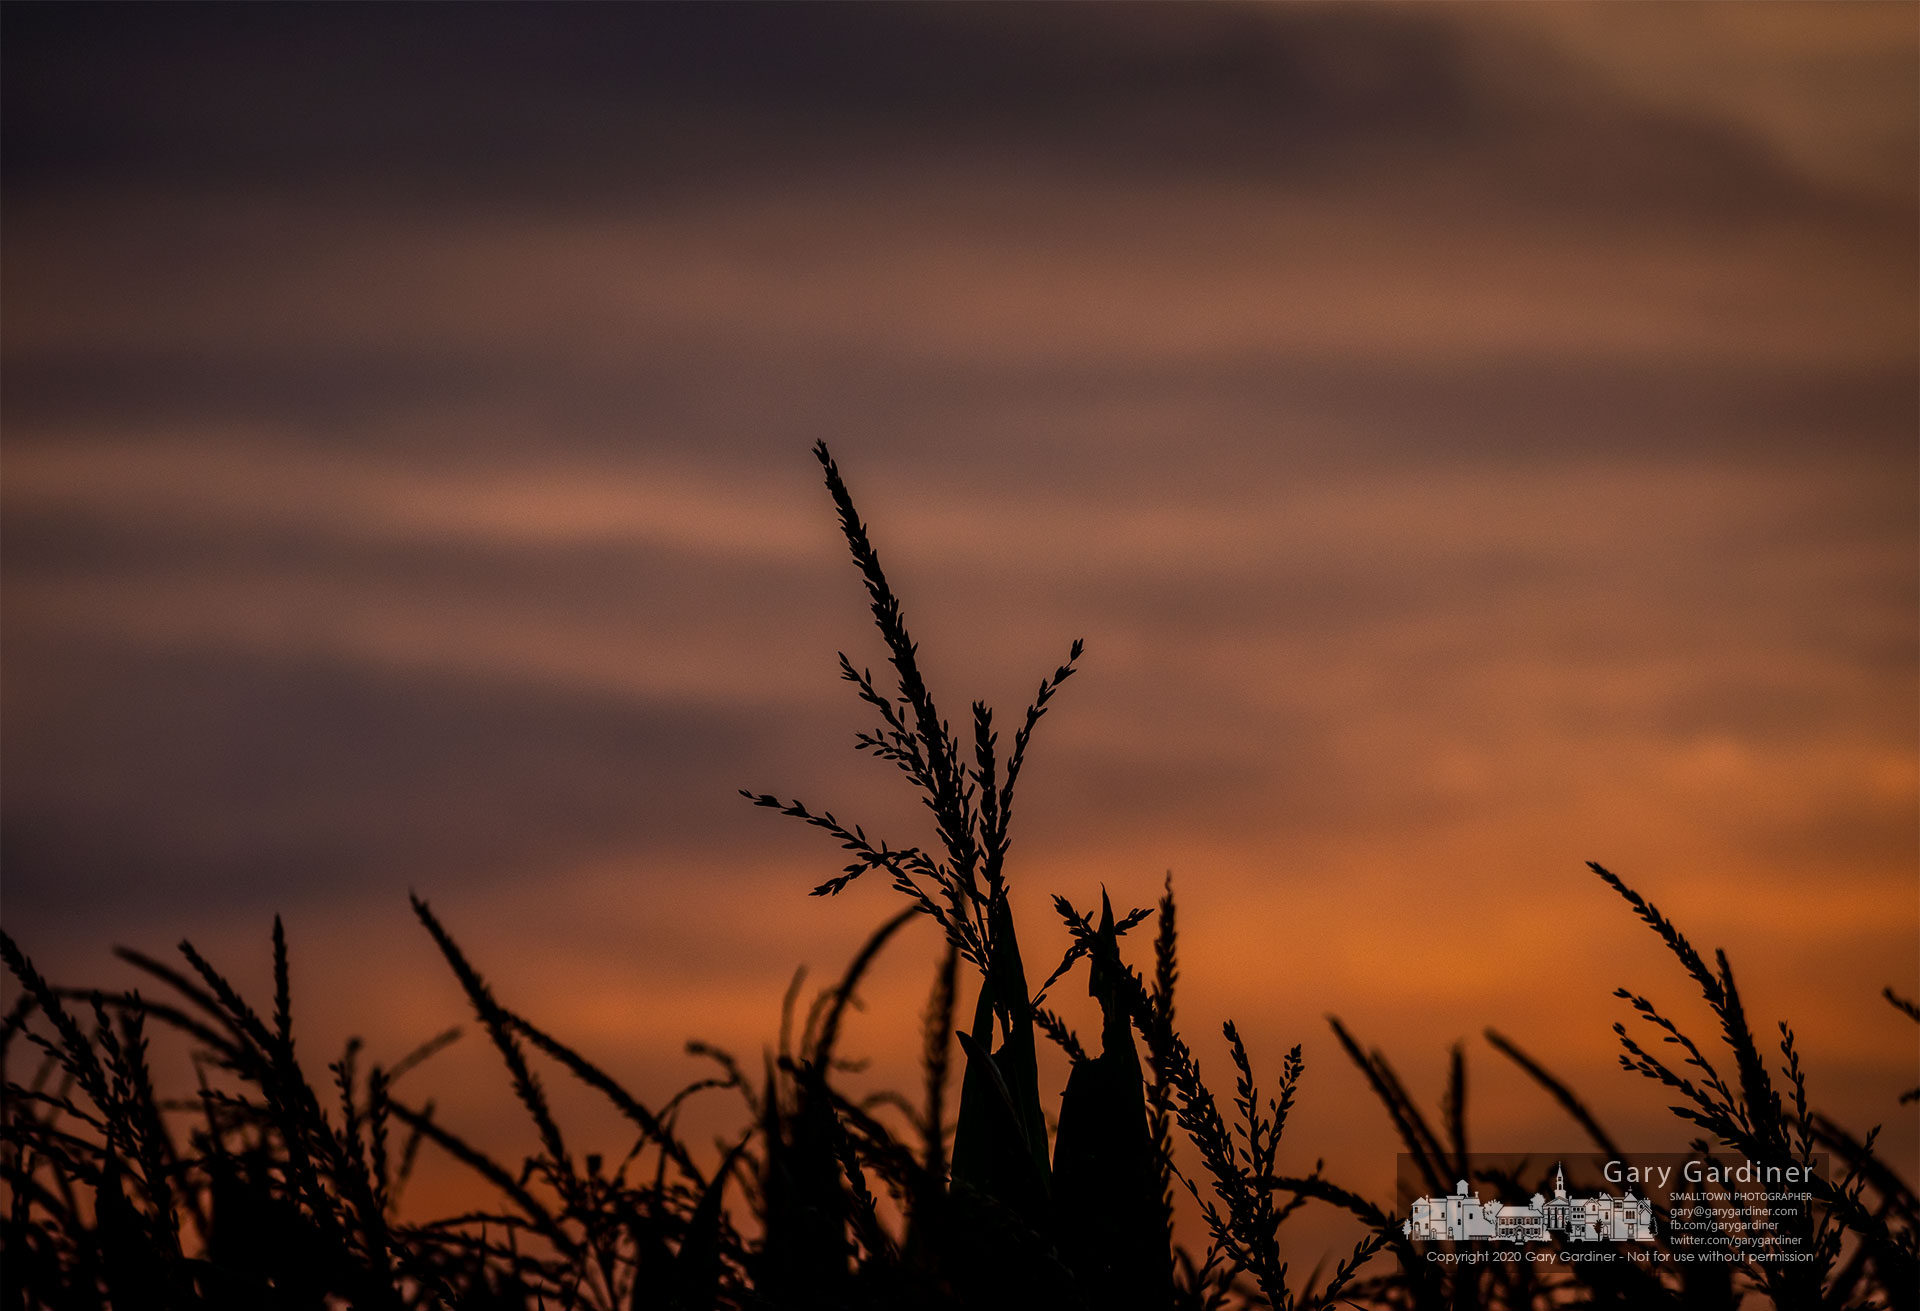 A tall corn stalk rises above other stalks on the Braun Farm as the crop gets closer to harvest as a warm late summer sunrise lights the horizon. My Final Photo for Sept. 7, 2020.